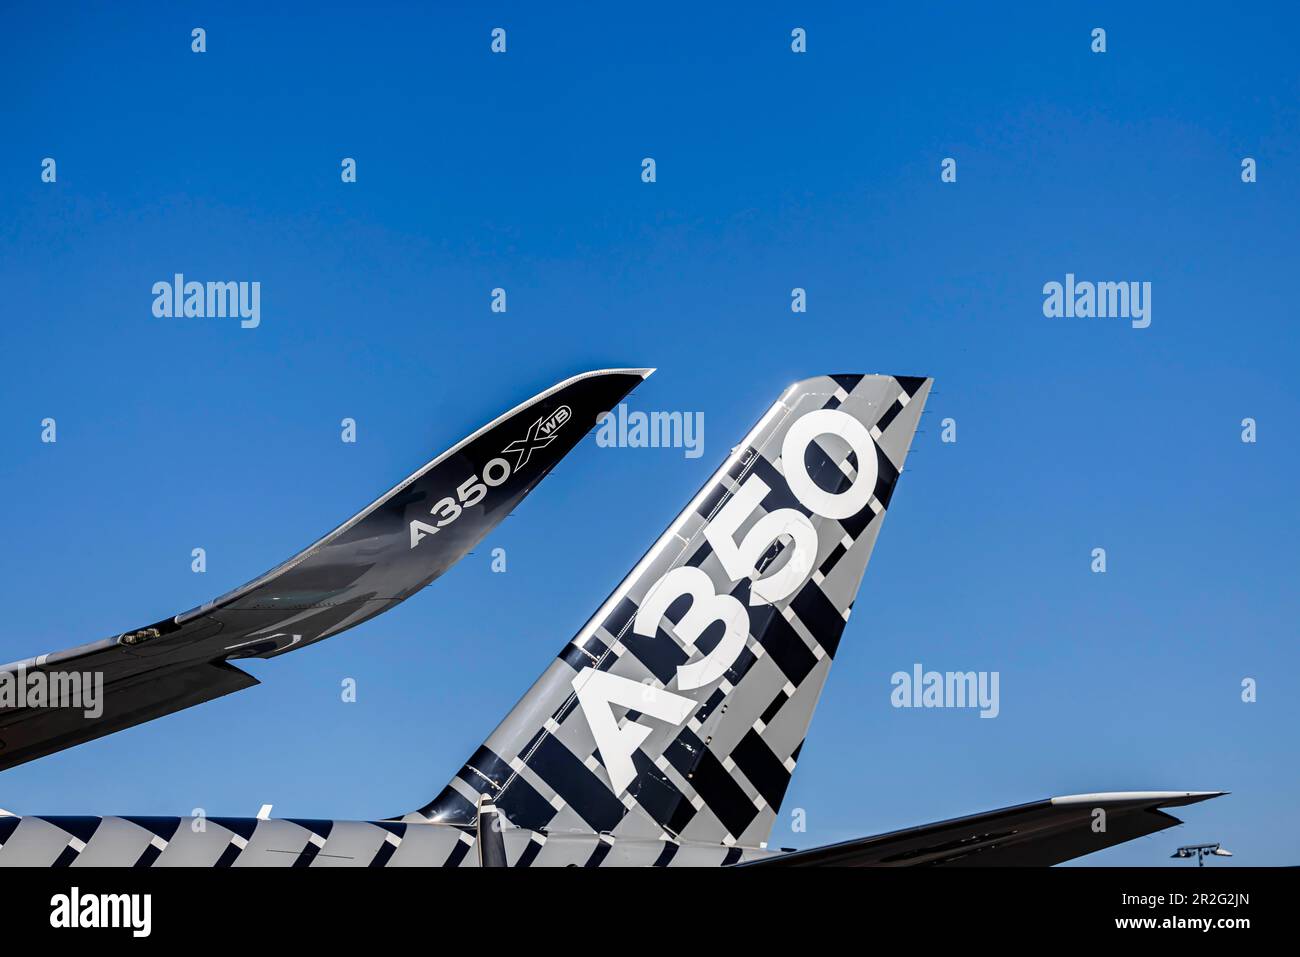 AIRBUS INDUSTRIE, AIRBUS A350-900, tail fin, wing with sharklets, winglets, ILA Berlin Air Show, Berlin International Aerospace Exhibition Stock Photo